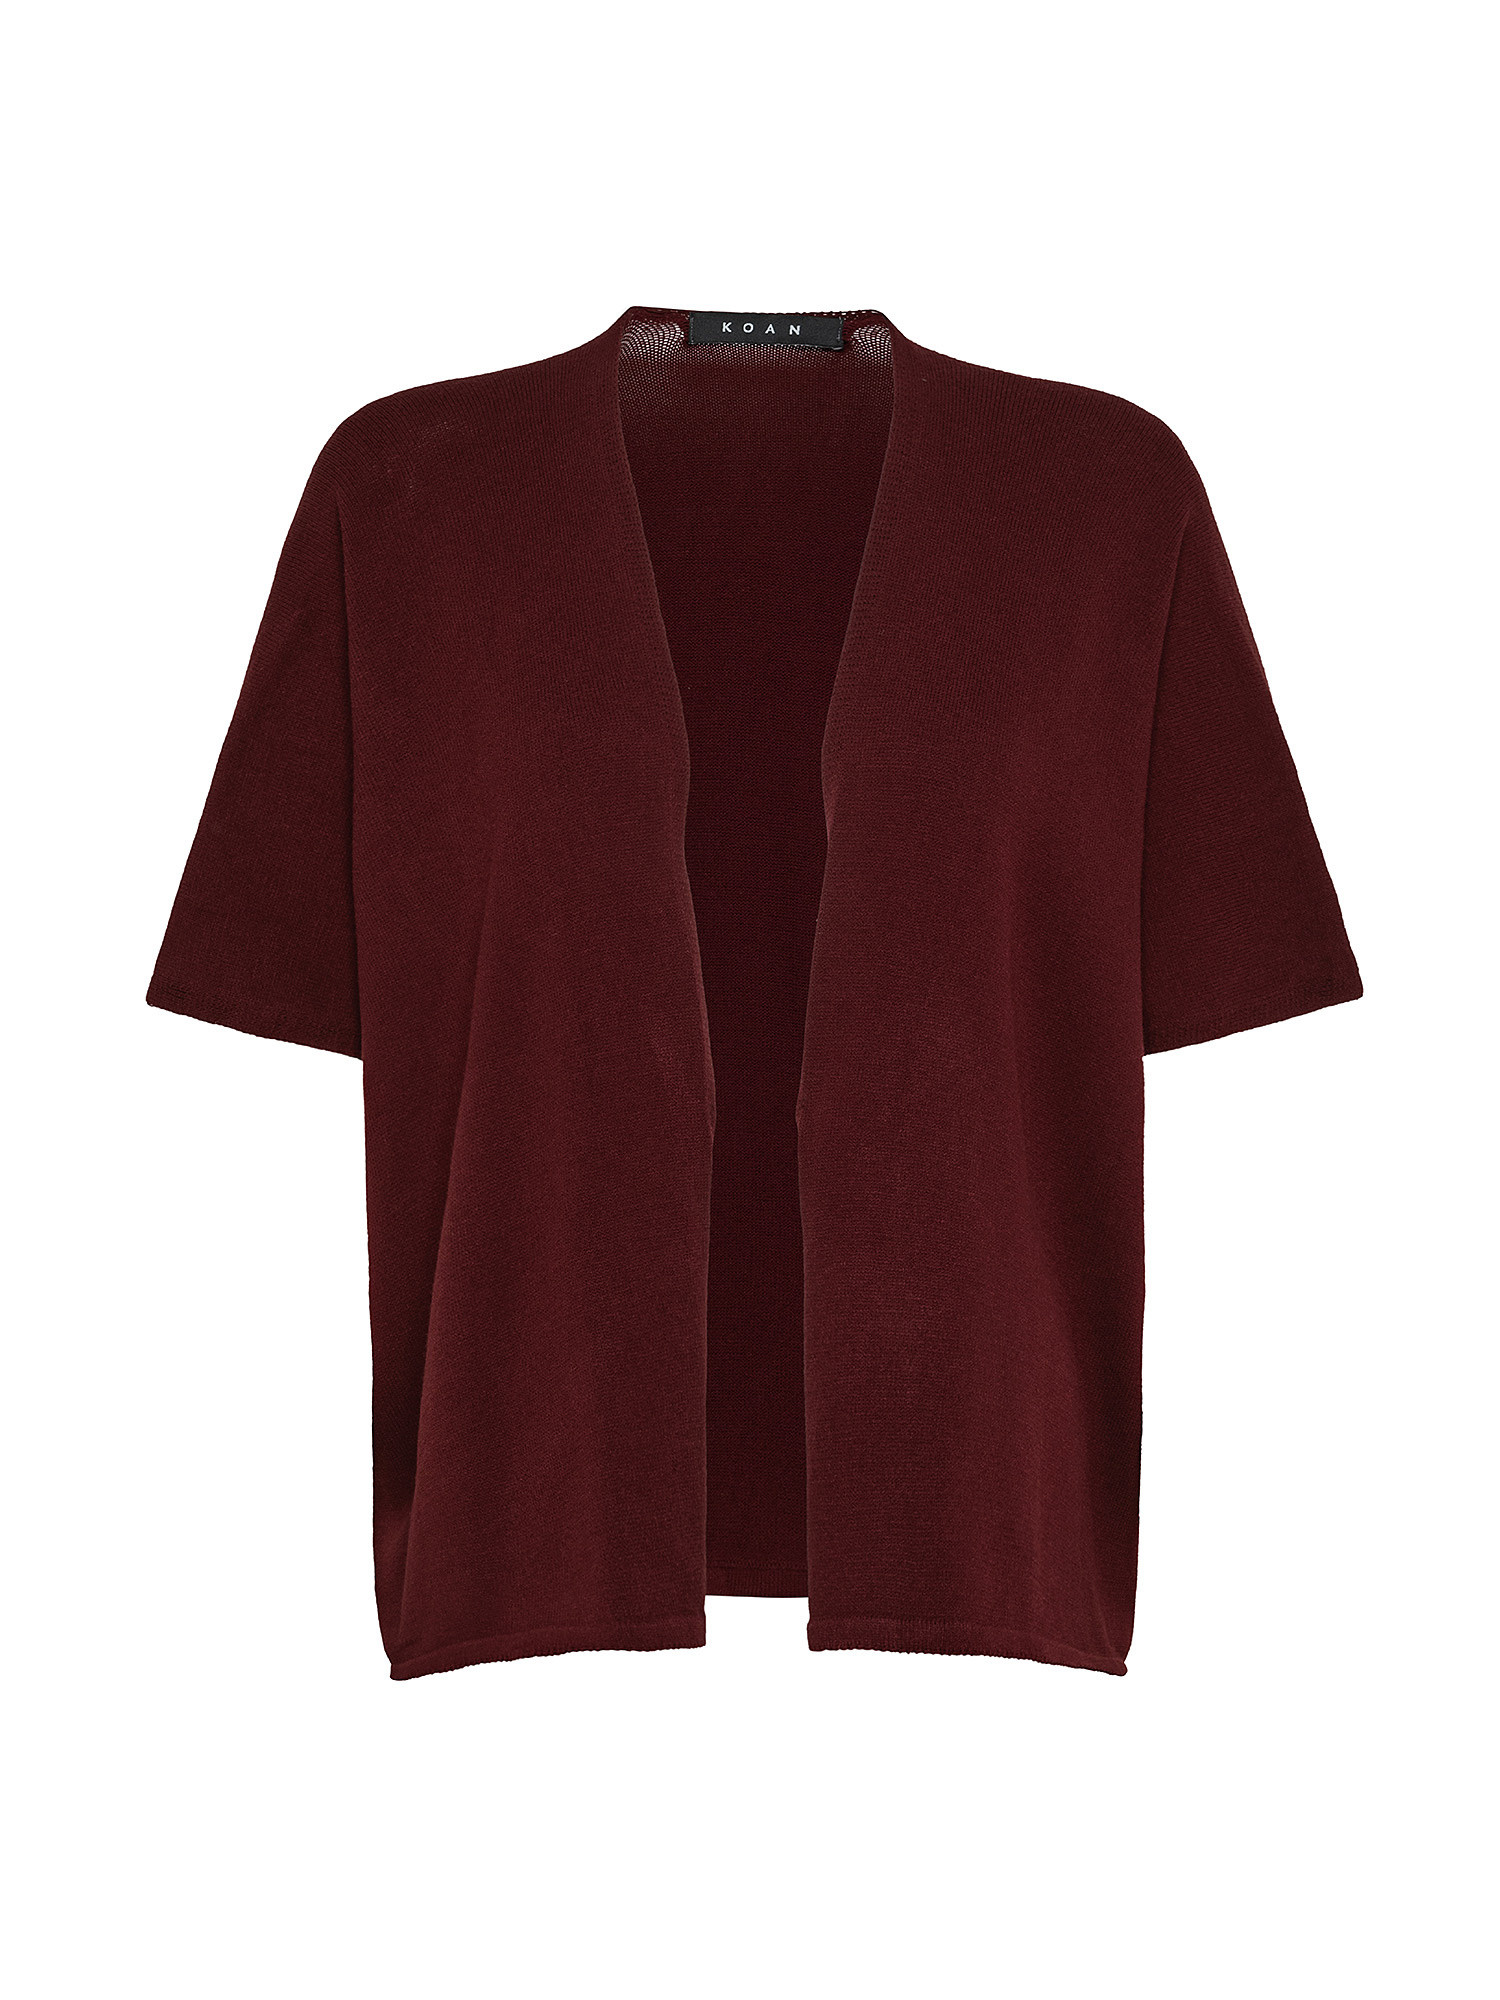 Cardigan, Red Bordeaux, large image number 0